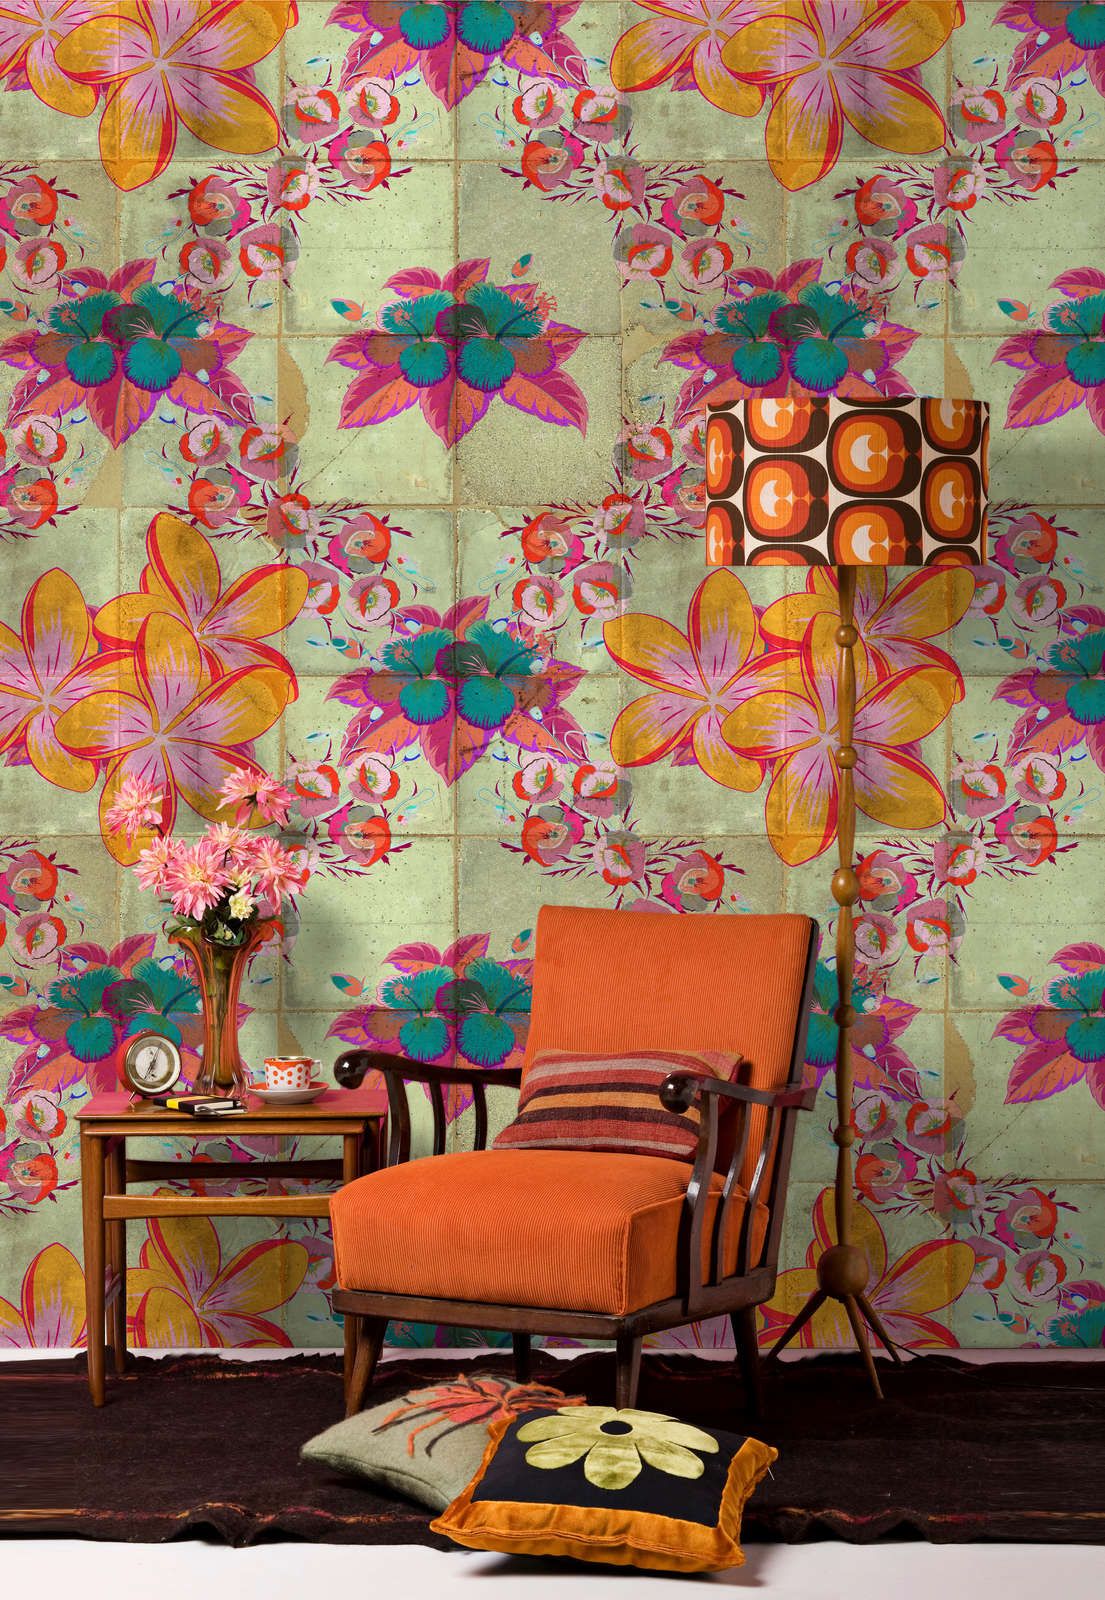             Photo wallpaper »jolie« - Floral design with kaleidoscope effect on concrete tile structure - Lightly textured non-woven fabric
        